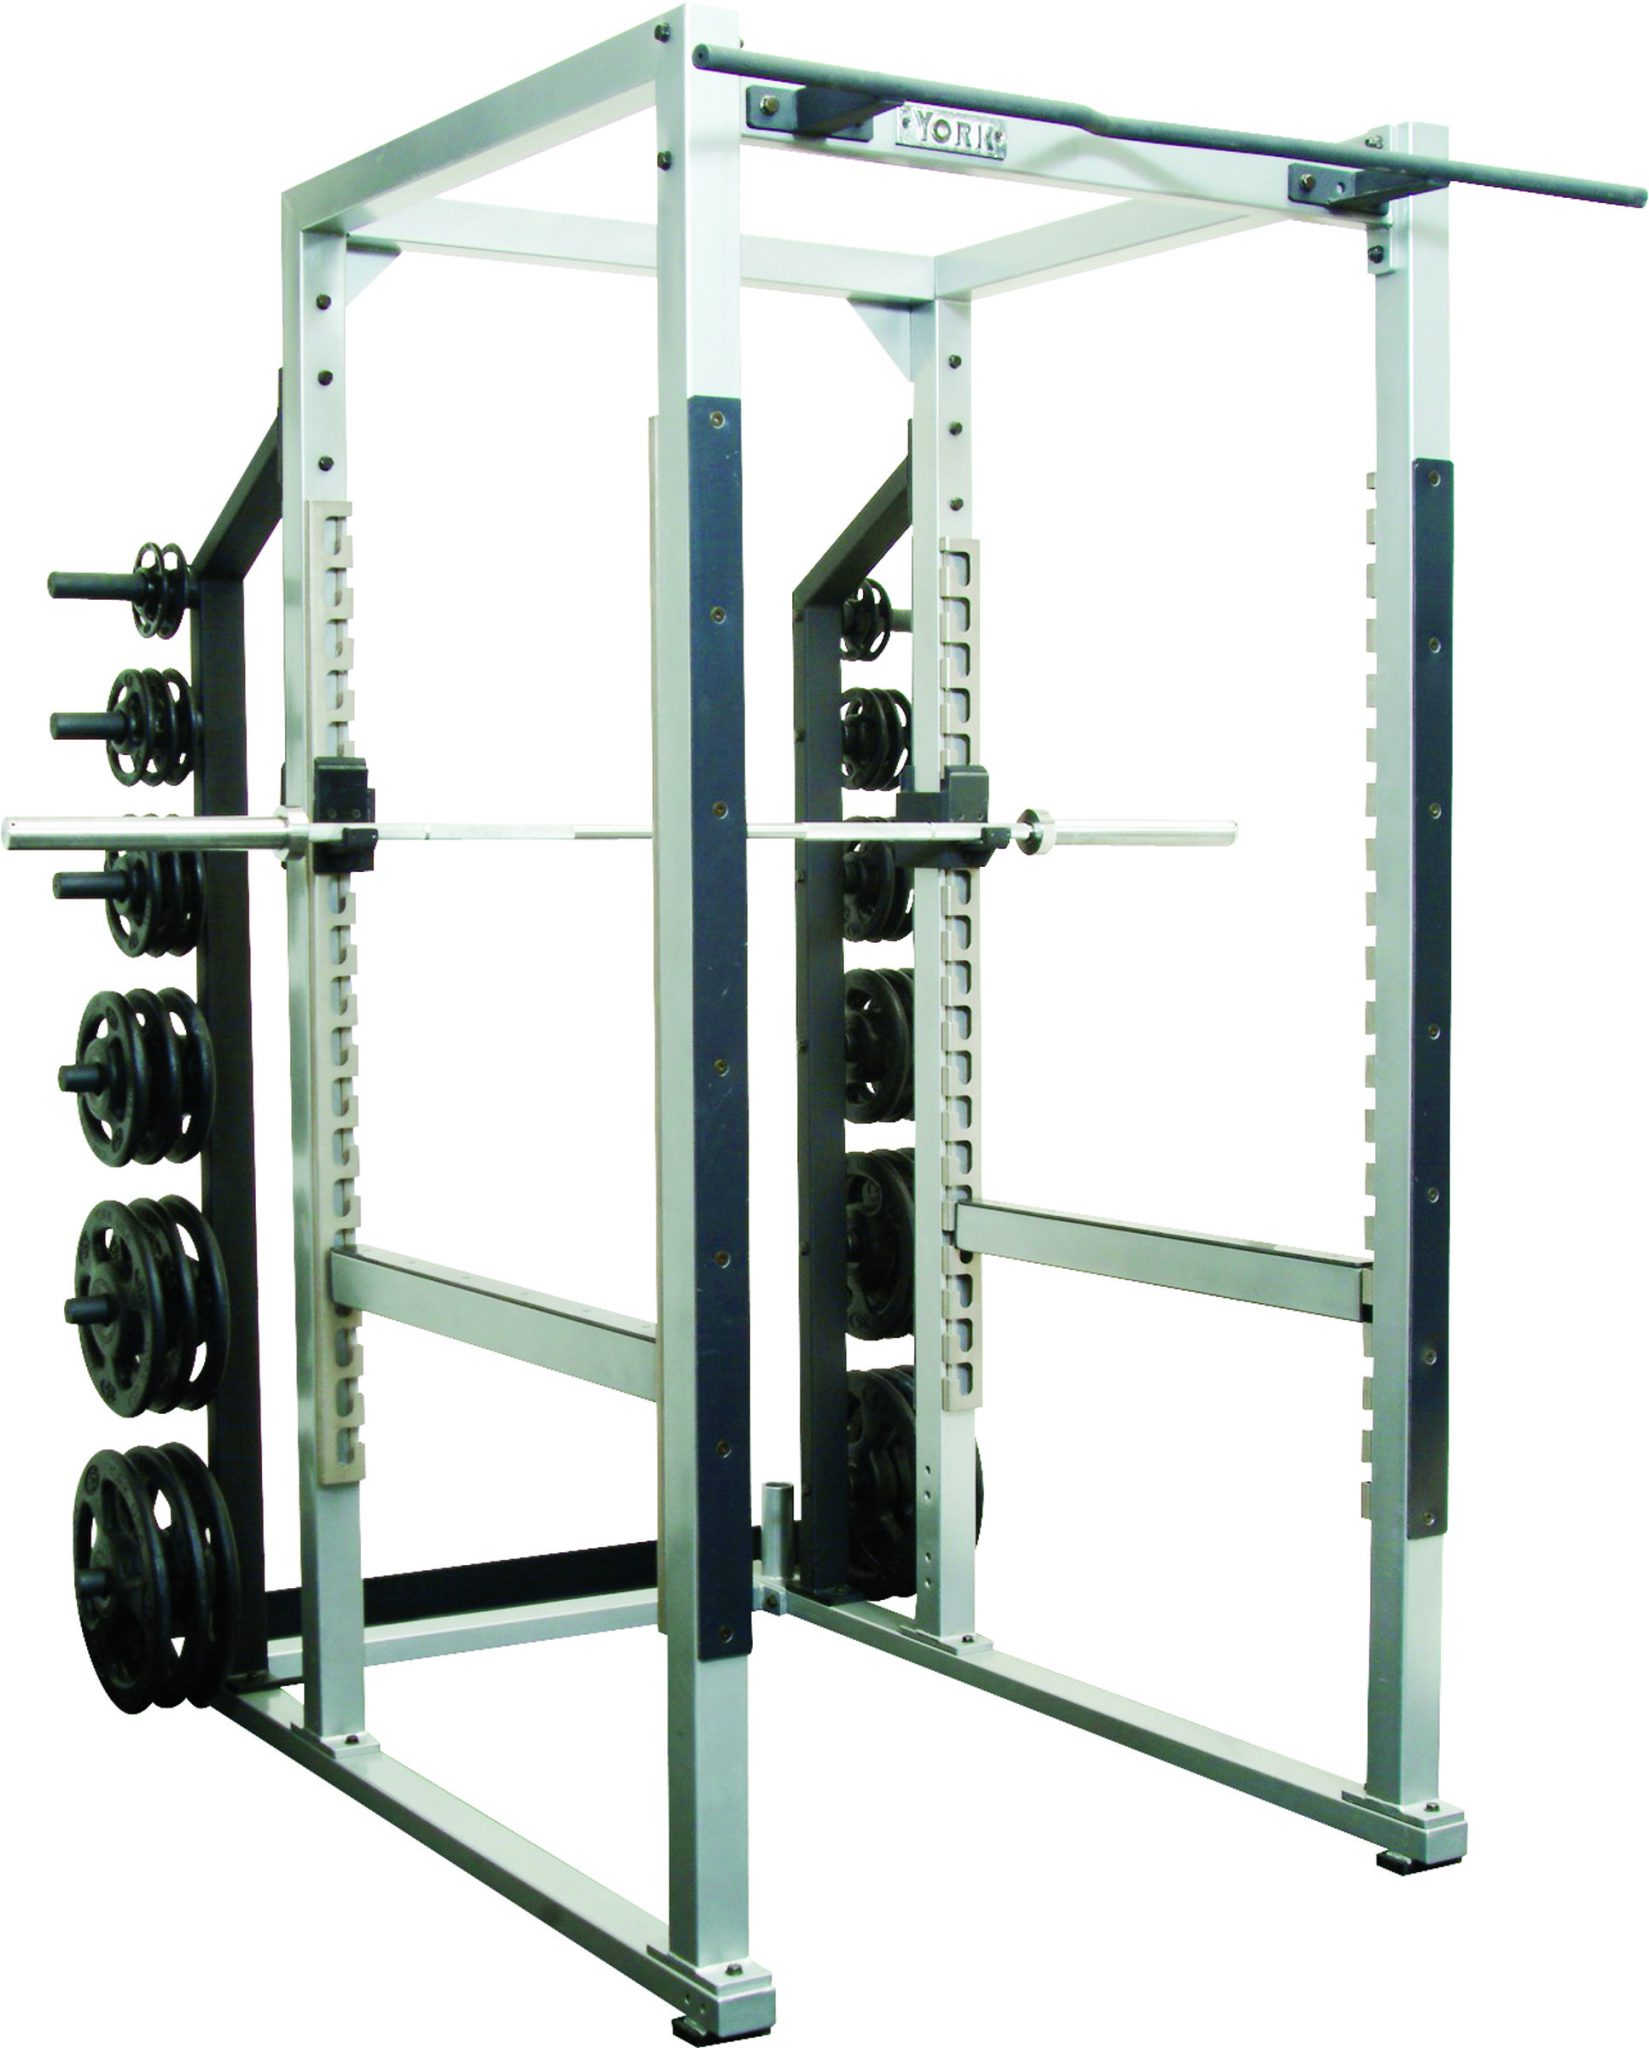 Barbell Stand Holder Bar Weight Plates Multi-Function Power Cage Rack Attachments Dip Bars Attachments Barbell Rack Holders Dip Grip Handles Storage Attachment Power Squat Rack Holder Hooks 